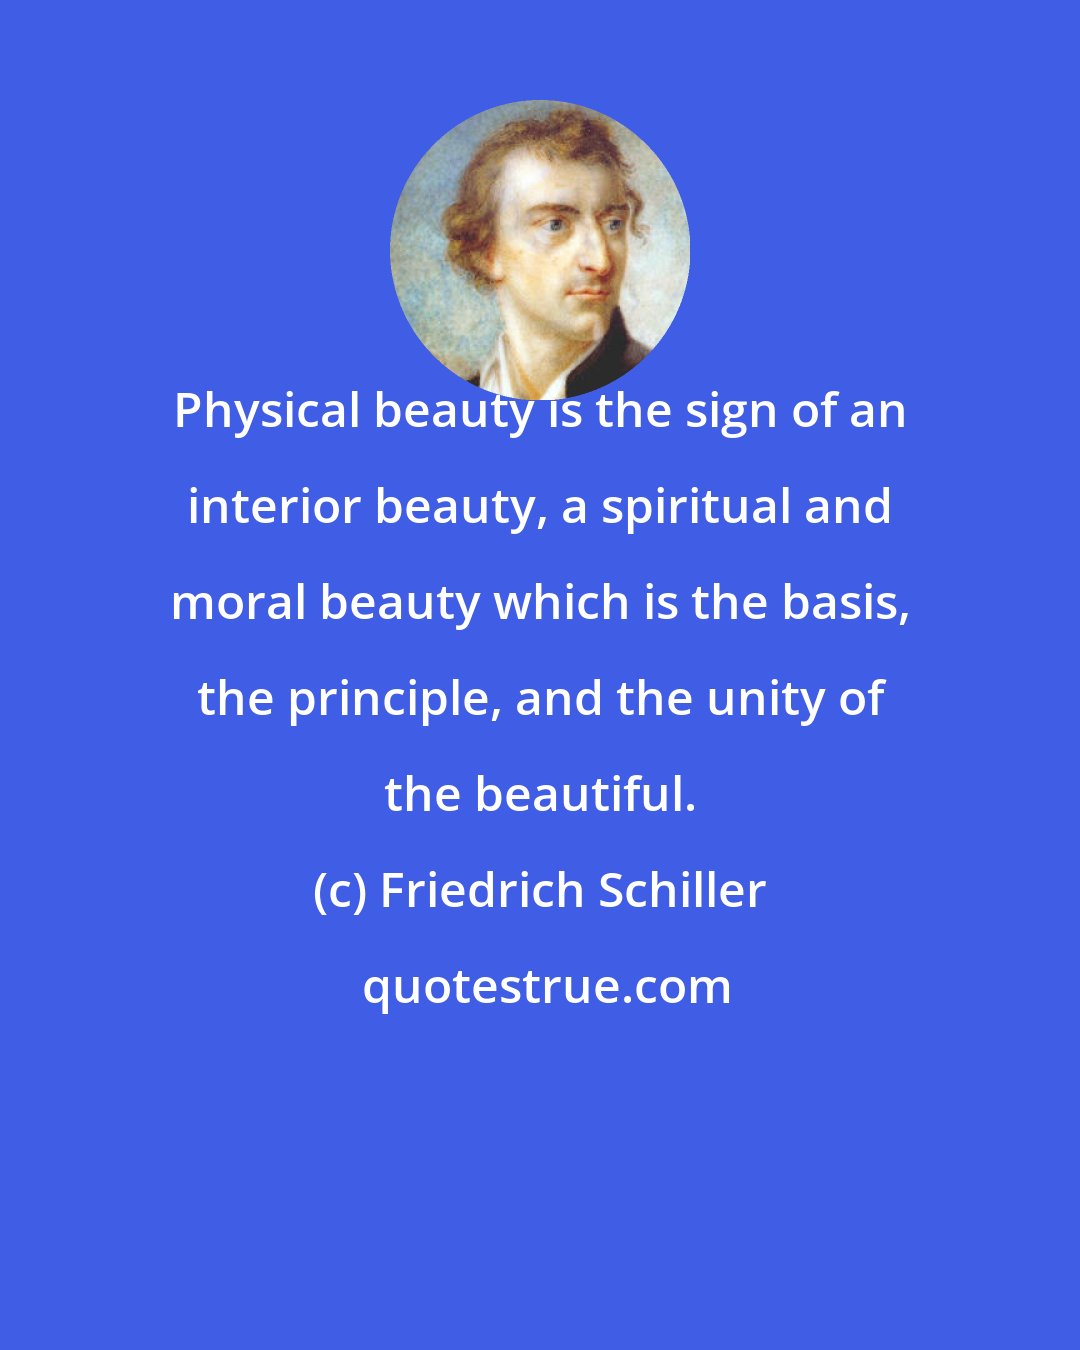 Friedrich Schiller: Physical beauty is the sign of an interior beauty, a spiritual and moral beauty which is the basis, the principle, and the unity of the beautiful.